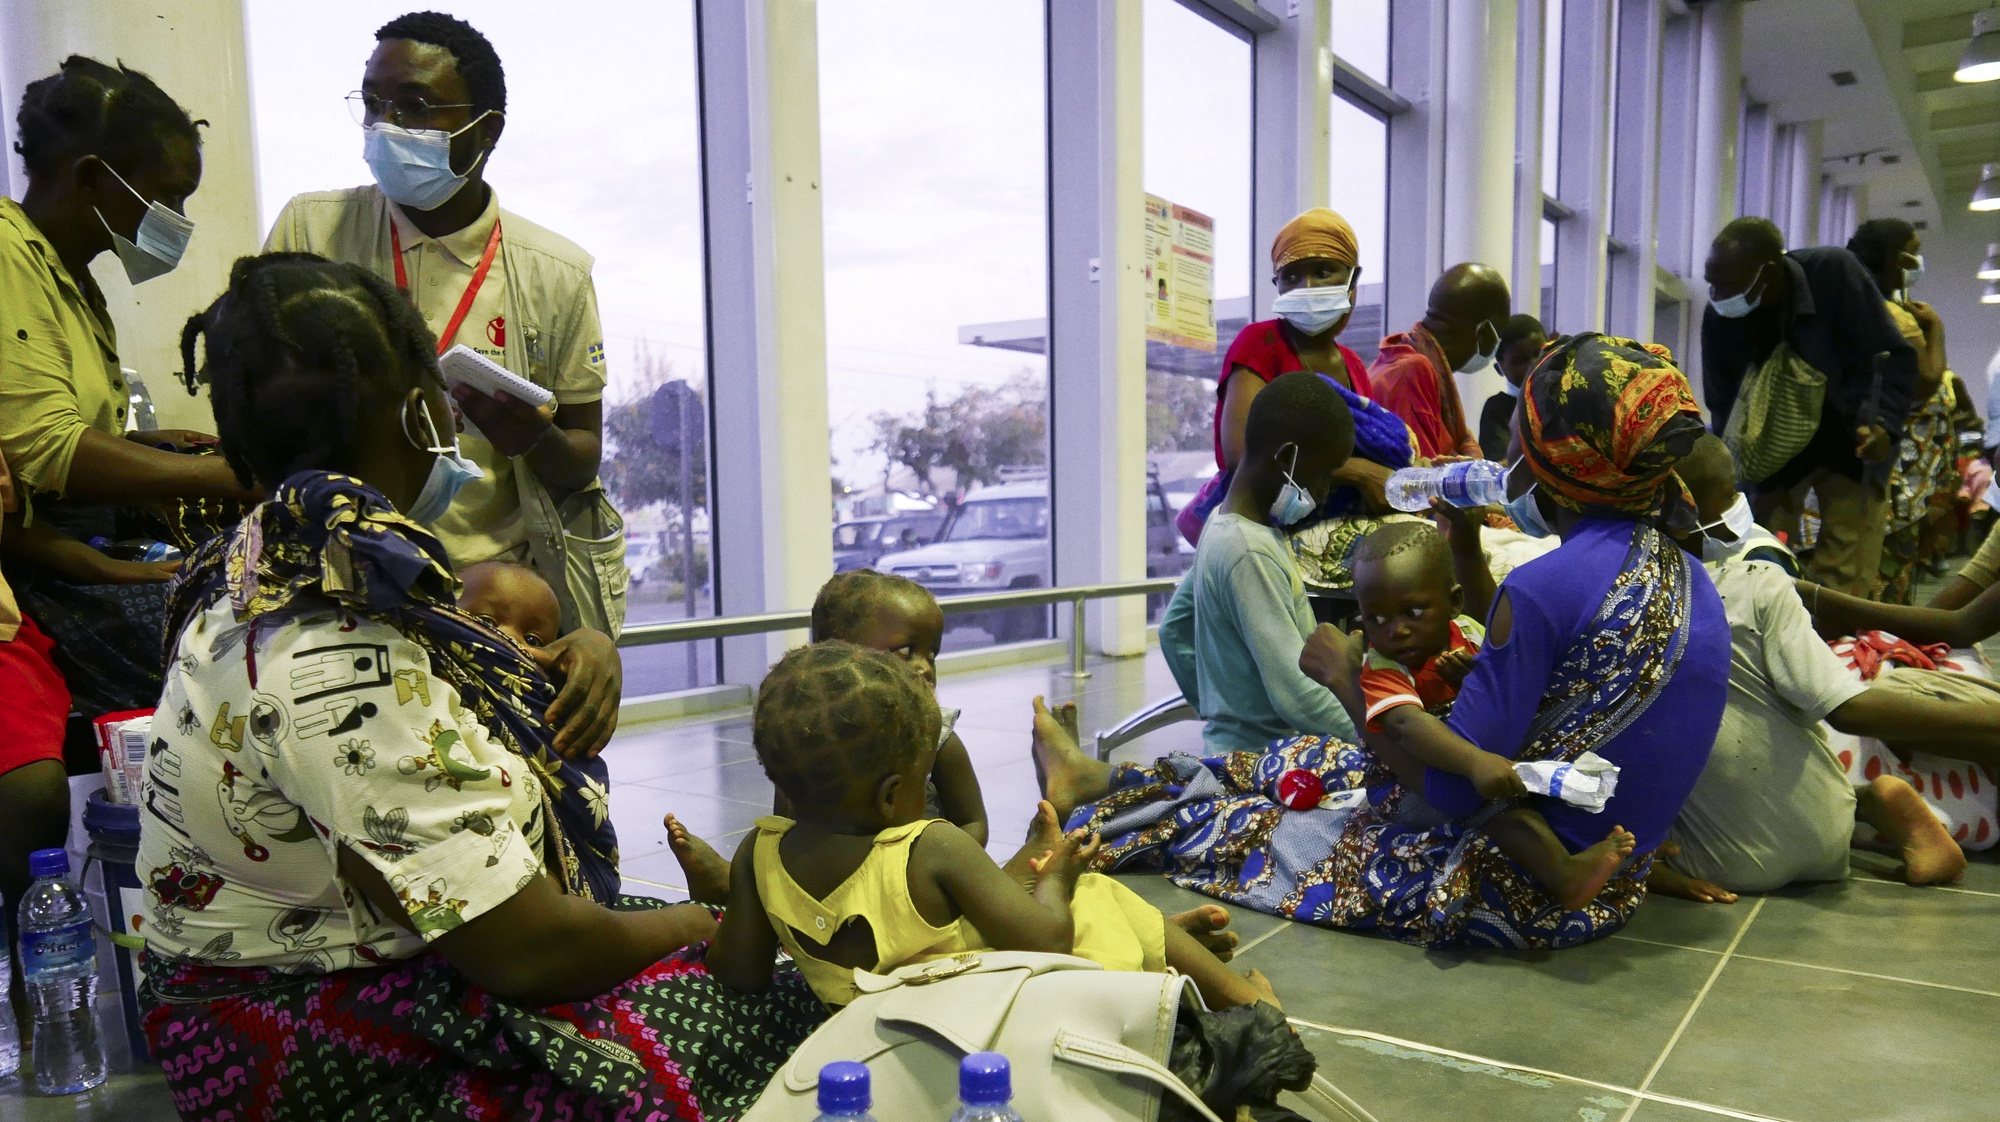 Displaced people from Palma, who took refuge in Afungi, have been airlifted, among them, women in labor, adults and, children shot, among other injuries, arrive at Pemba Airport, Mozambique, 30 March 2021. Since Sunday, several boats, private and others organized by Total and the authorities, have been transporting people to Palma, in a number that should already be over 2,000, but without official confirmation. LUIS FONSECA/LUSA